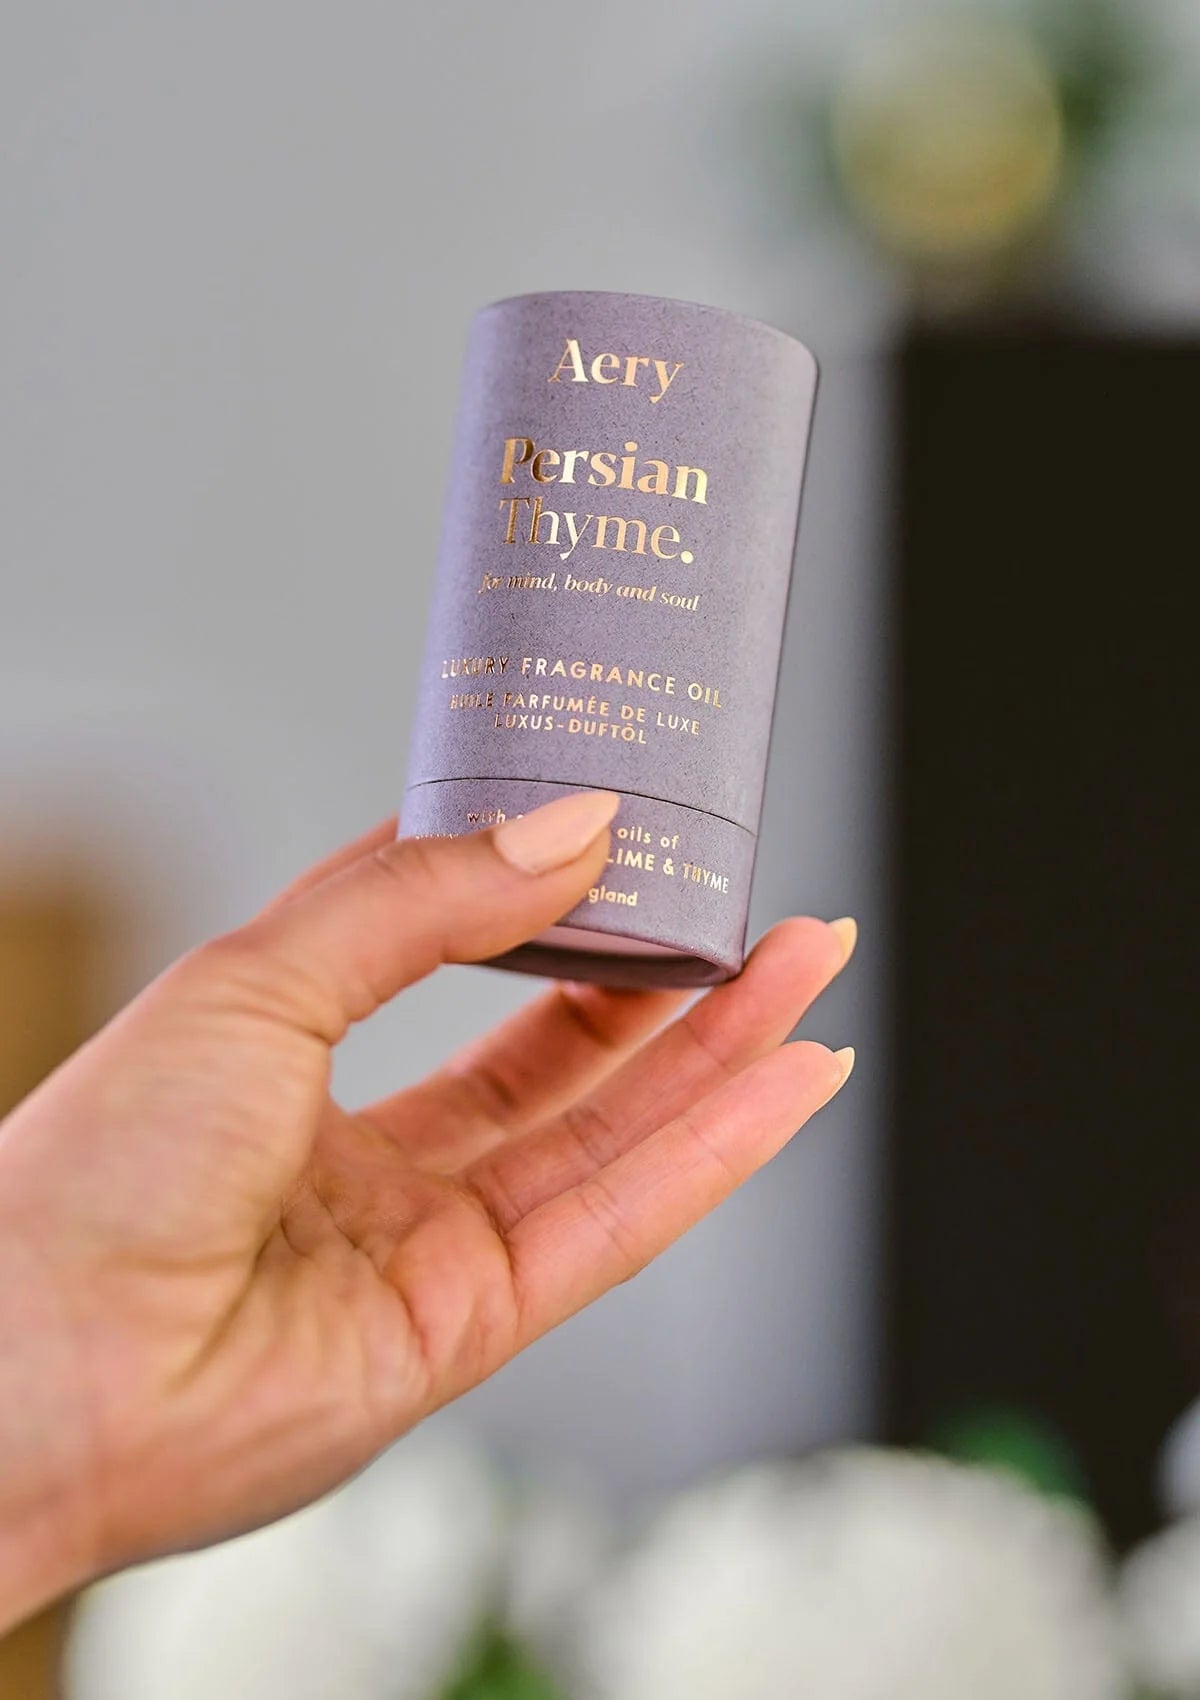 Aery - Persian Thyme Fragrance Oil